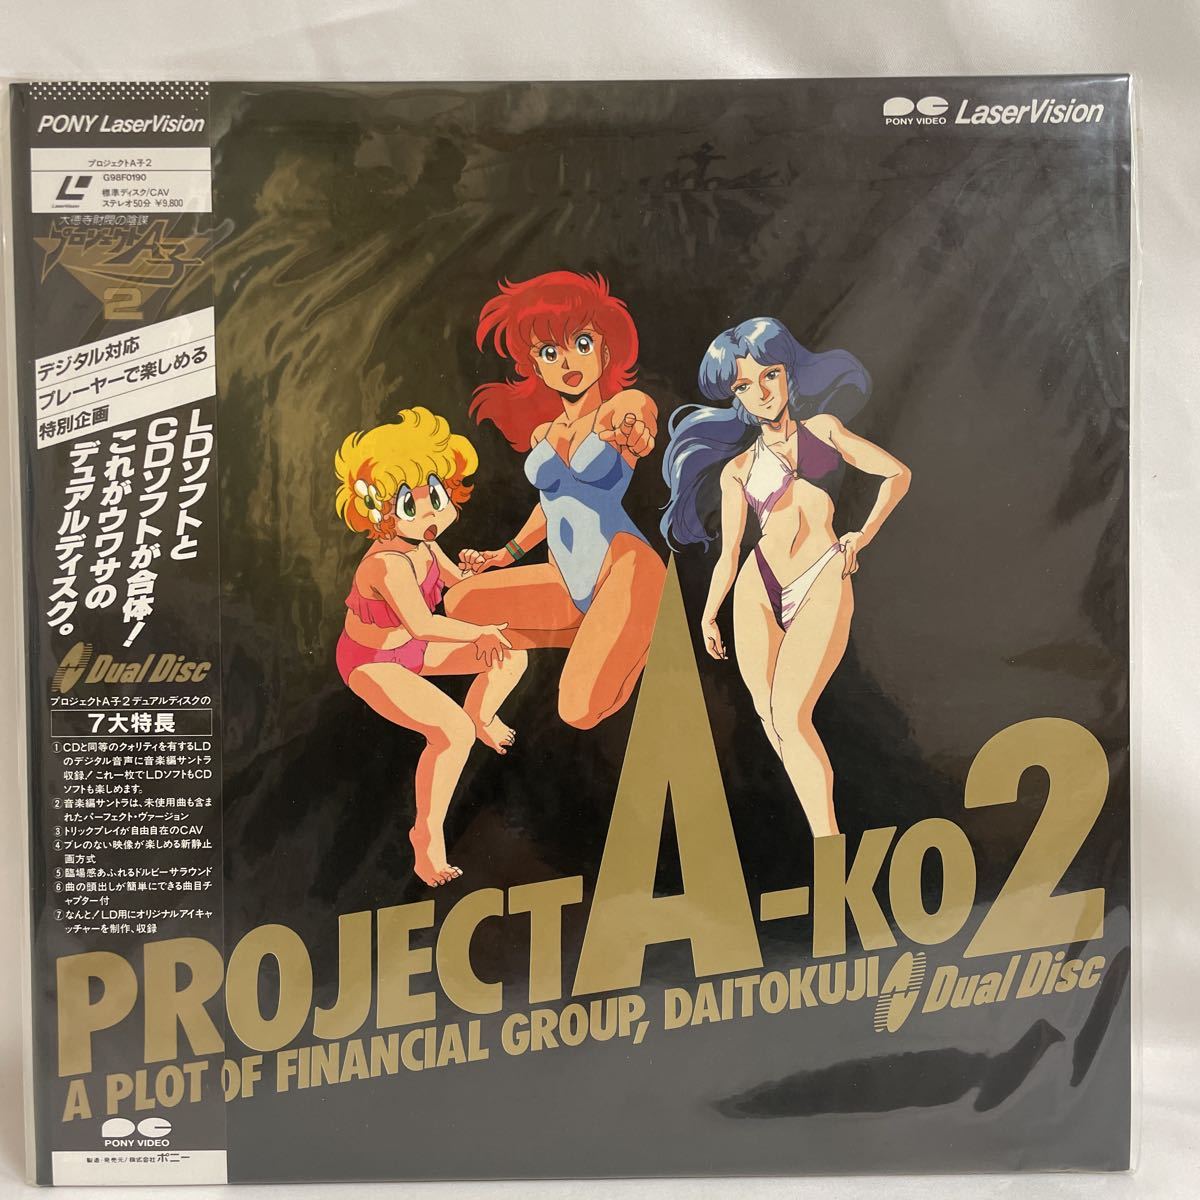  Project A... compilation Perfect disk [2][3] laser disk 4 pieces set 99